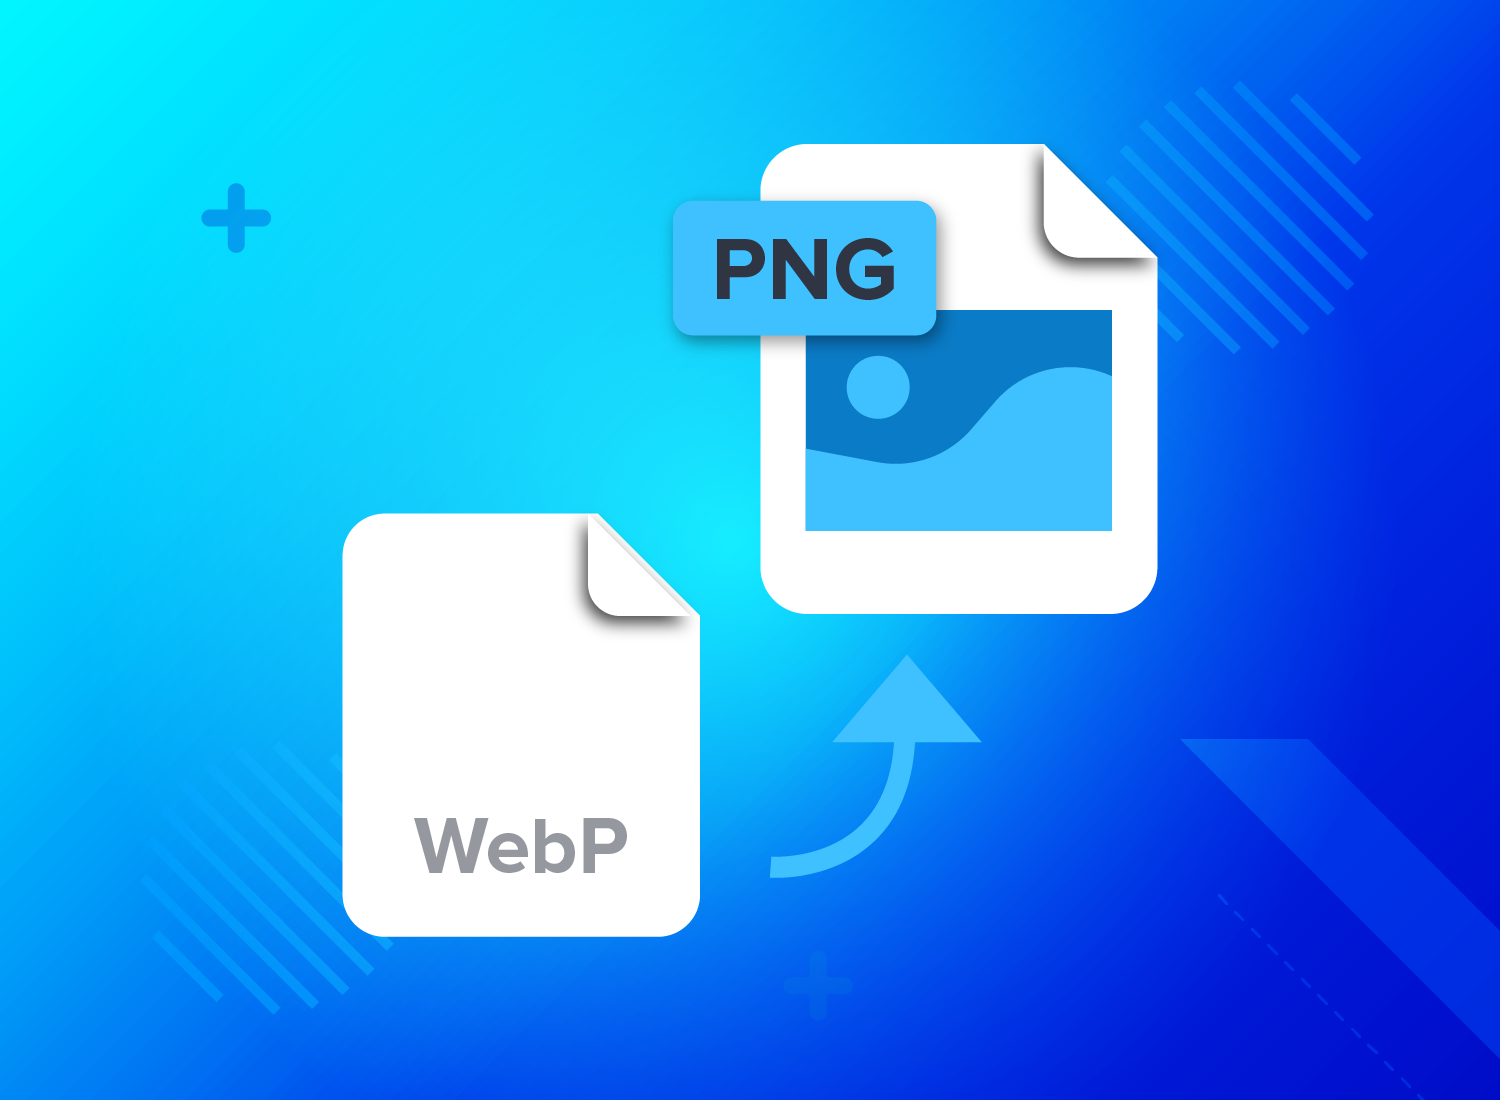 GIF To PNG _Converter - Official app in the Microsoft Store